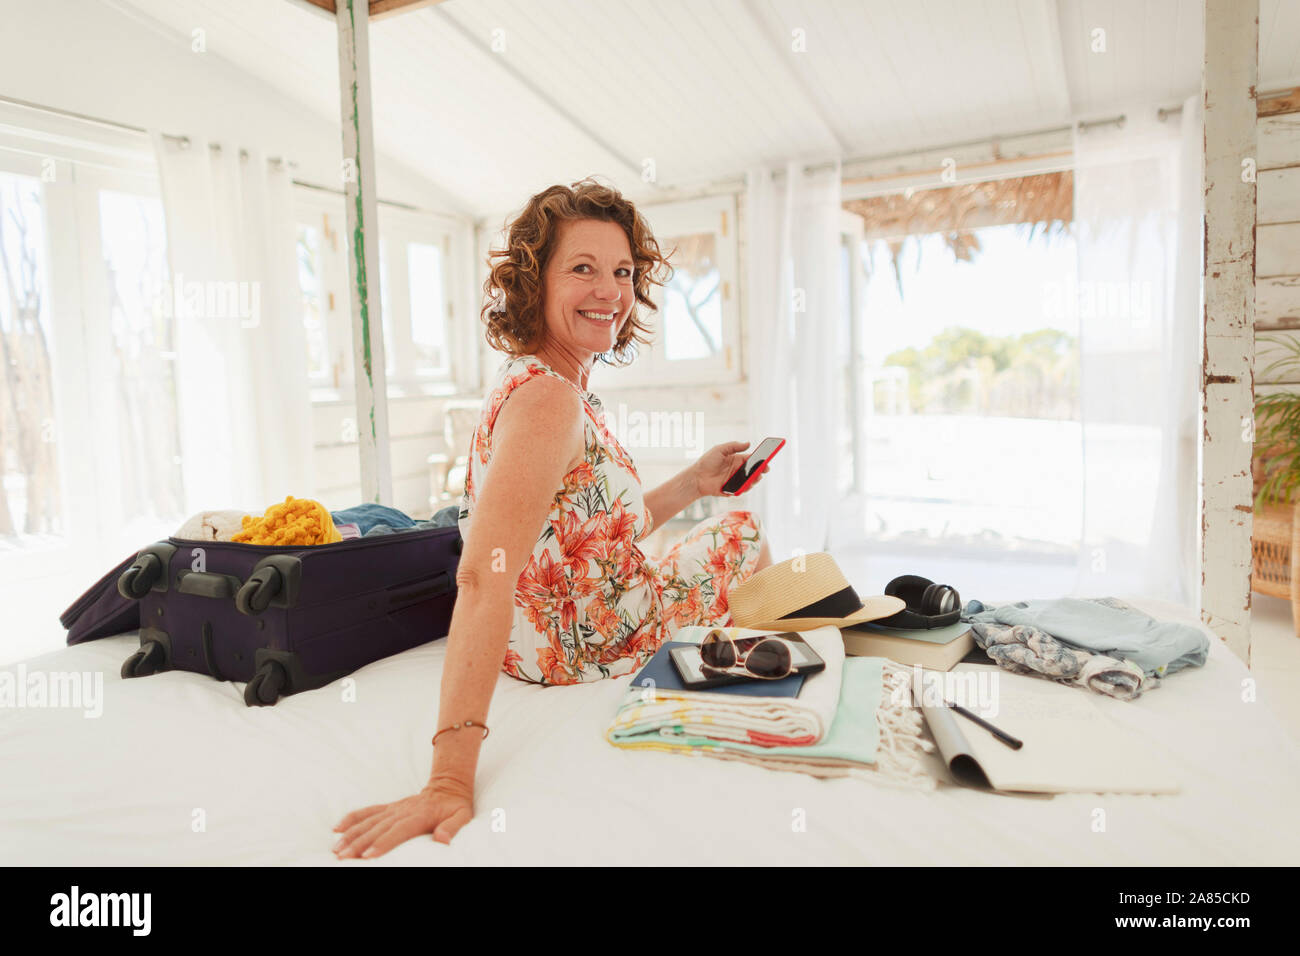 Portrait happy woman unpacking suitcase on beach house bed Stock Photo